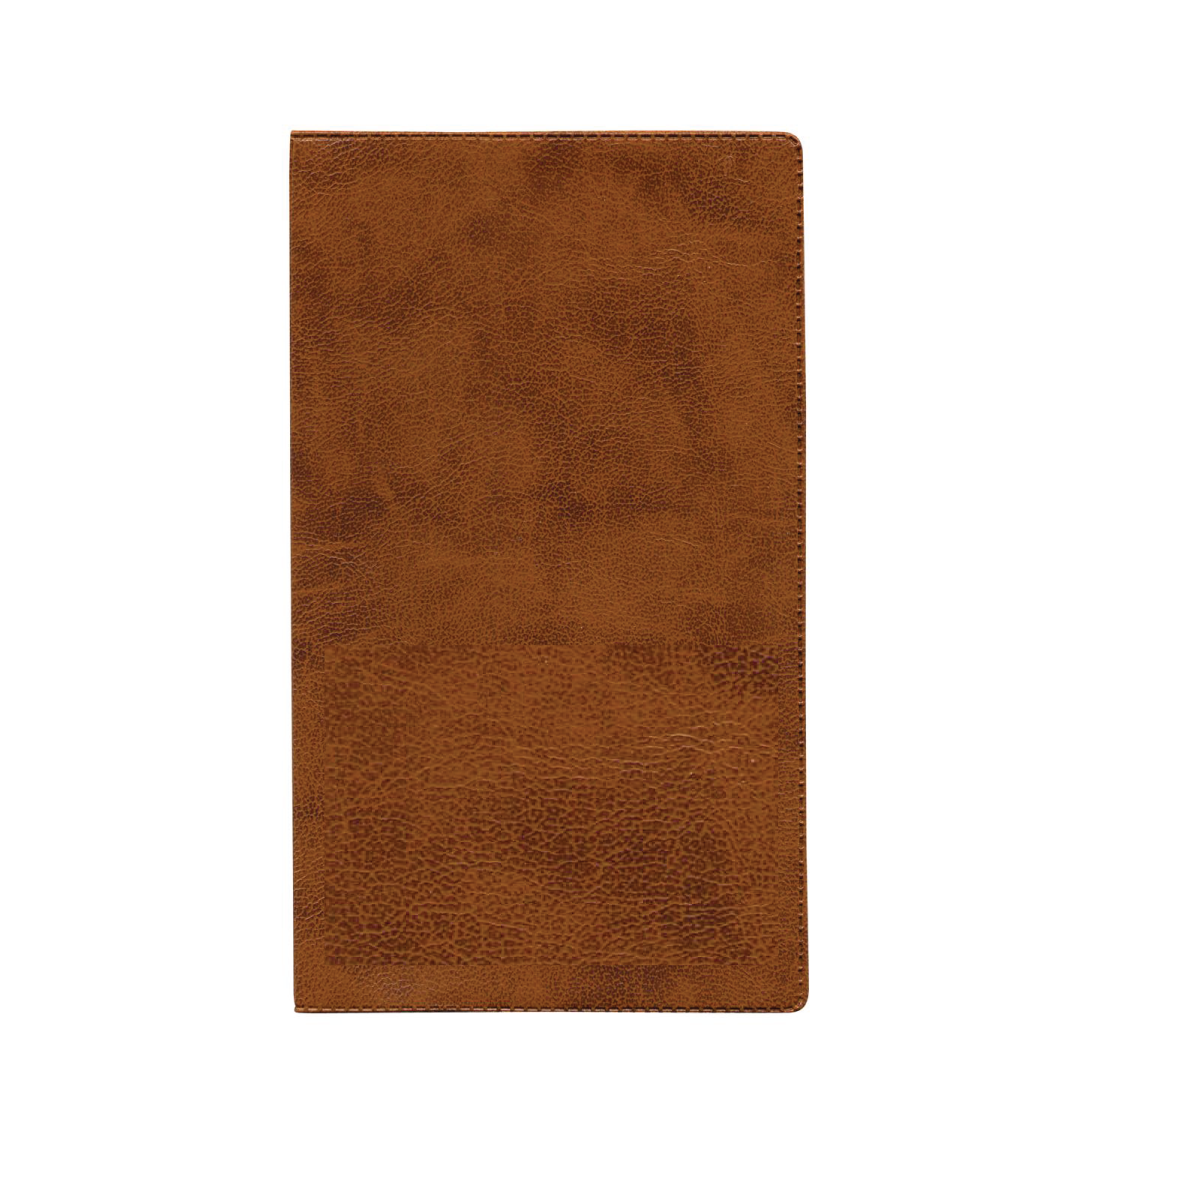 Almond Executive Monthly Pocket Planner